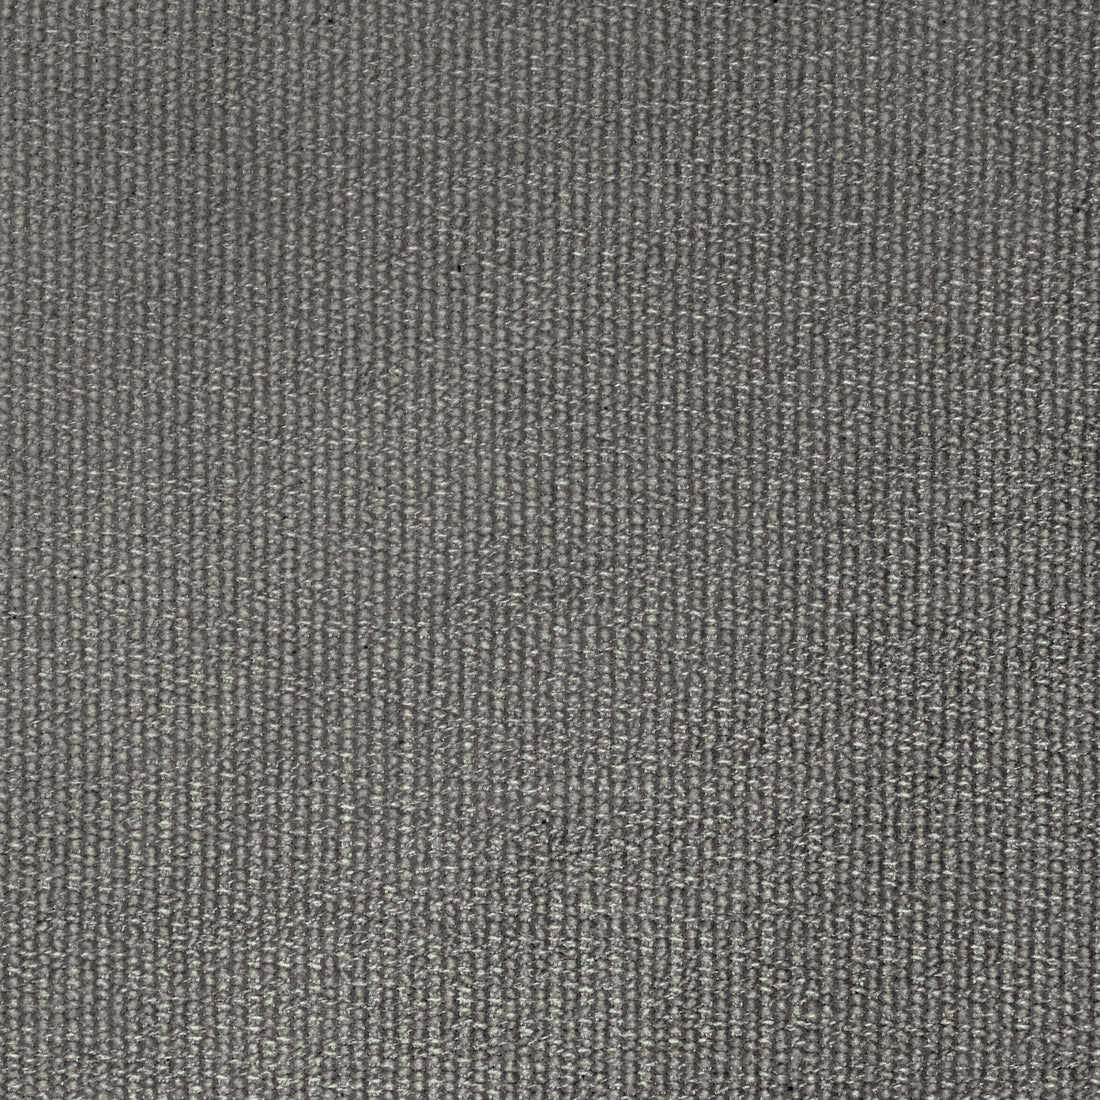 Entoto Weave fabric in grey color - pattern 2020109.21.0 - by Lee Jofa in the Breckenridge collection